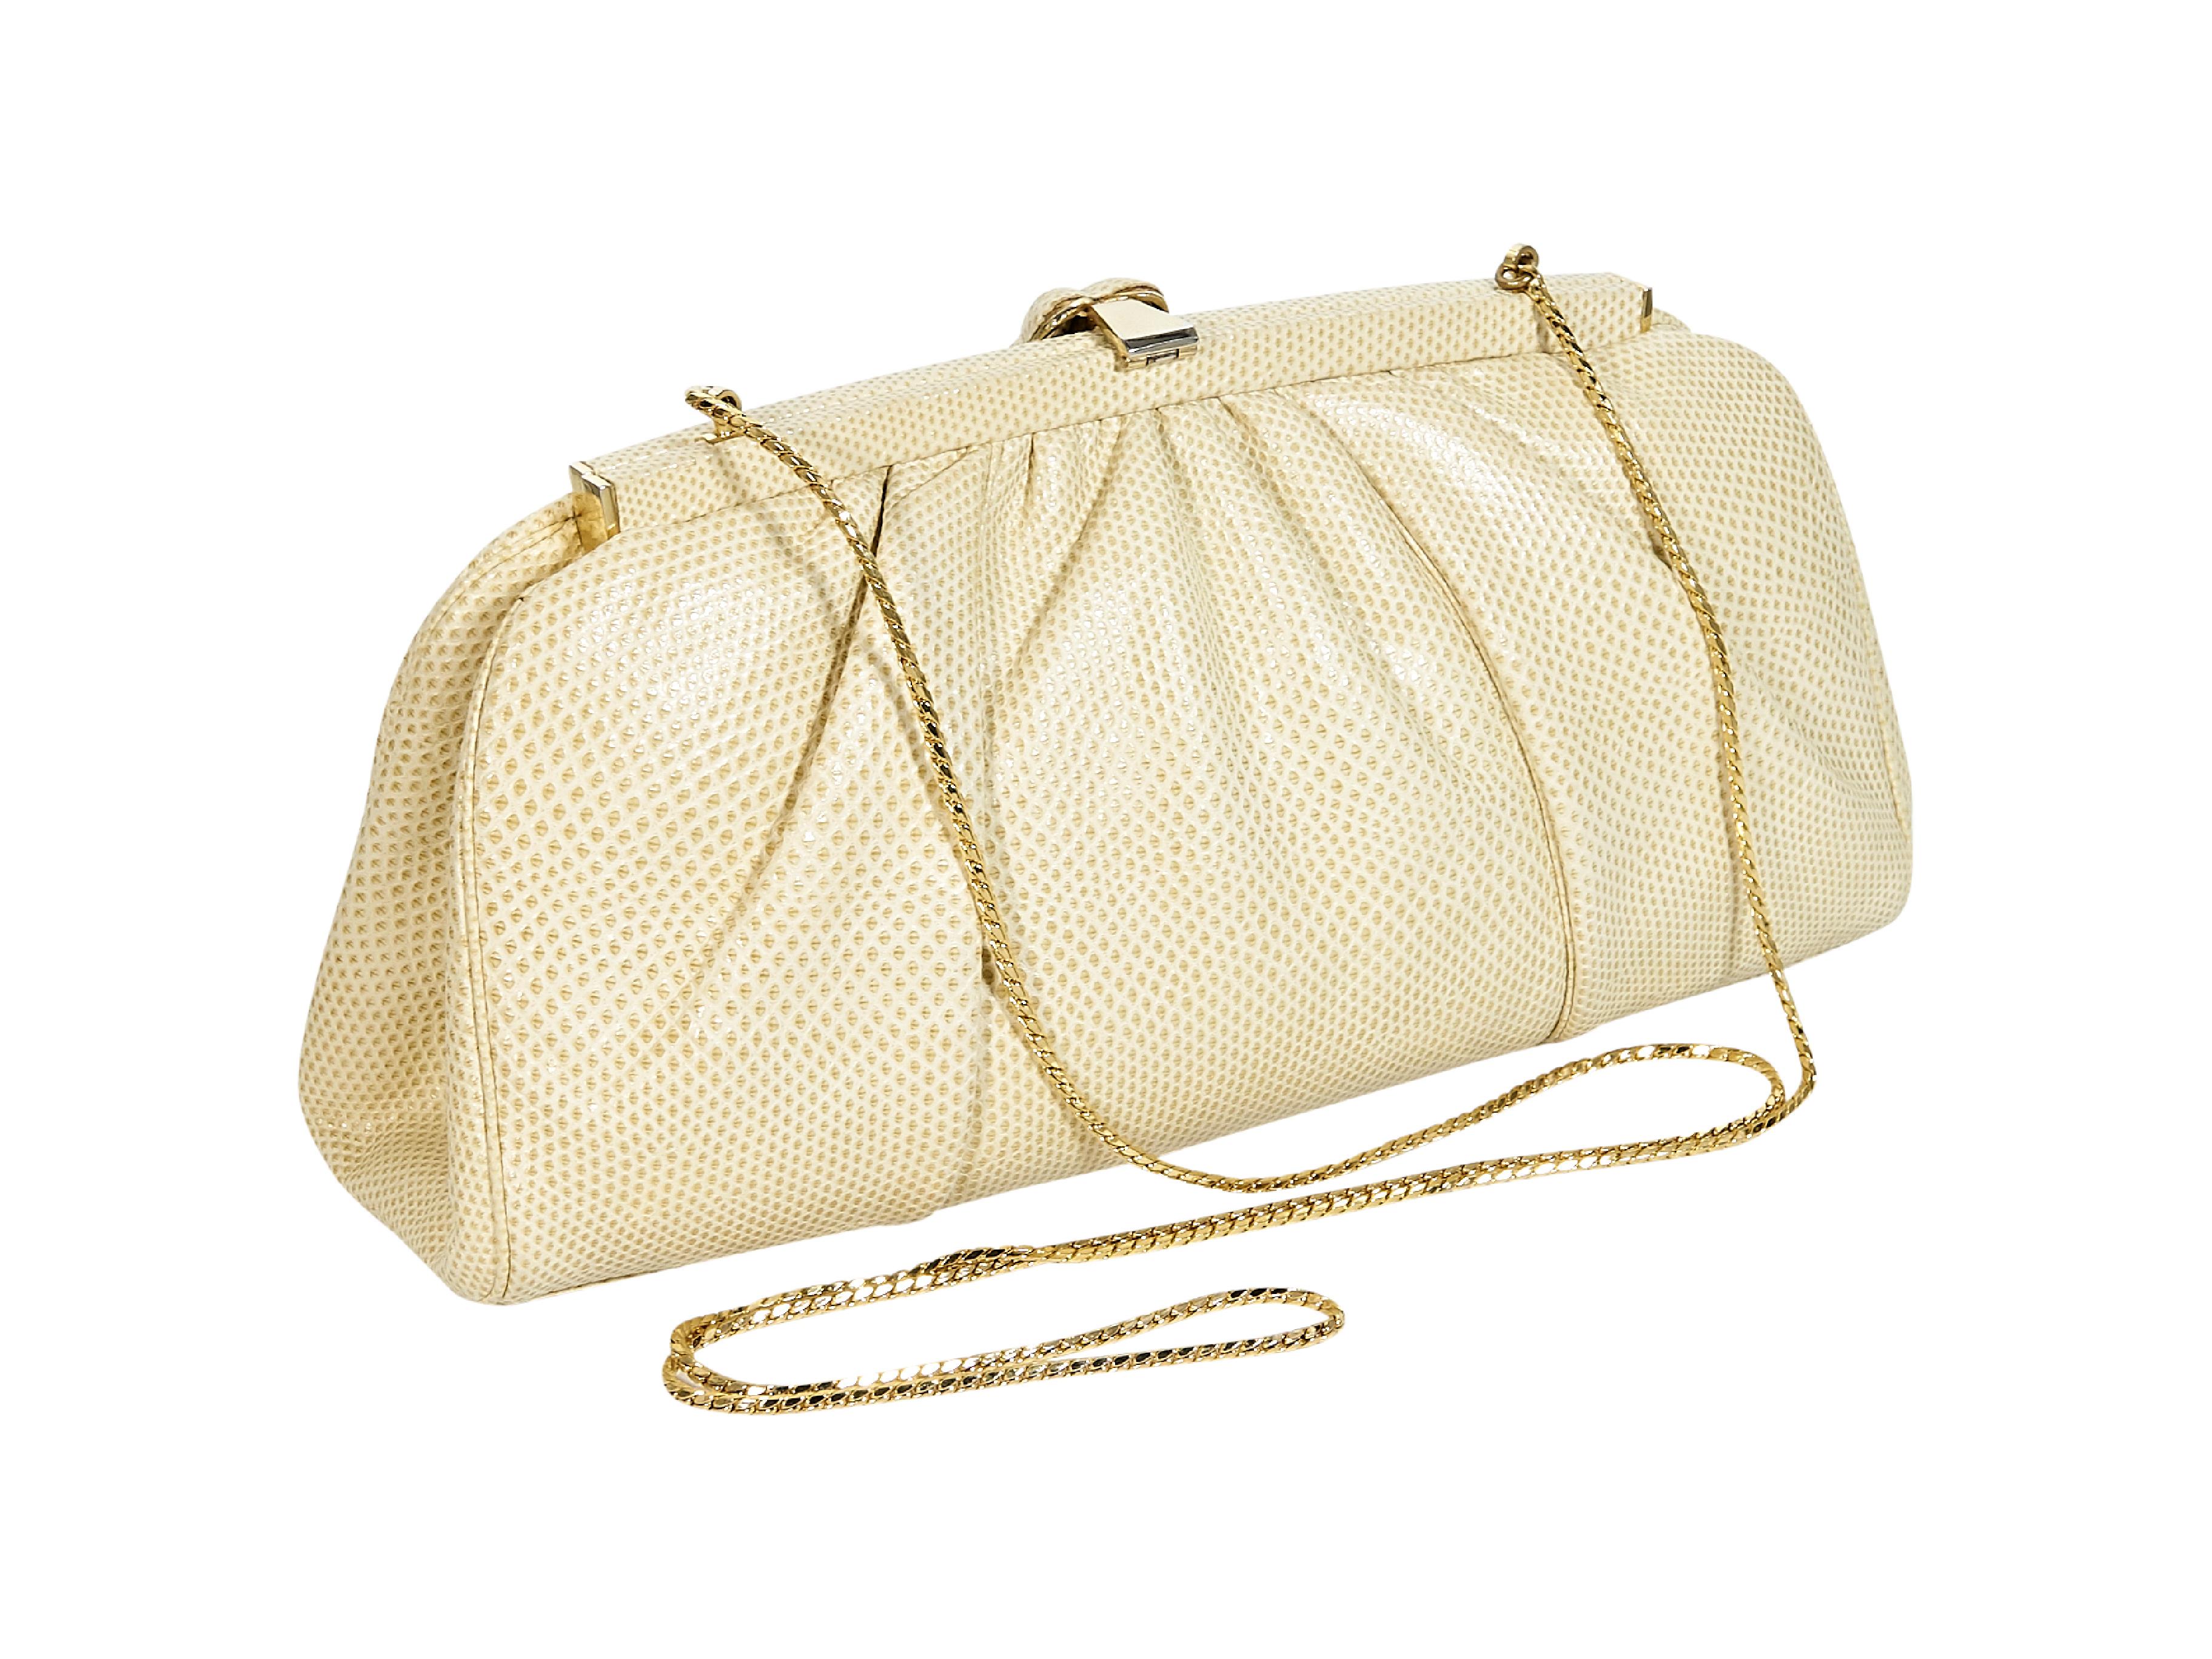 Product details:  Cream floral-clasp clutch by Judith Leiber.  Flip-top closure.  Lined interior with inner zip pocket.  Goldtone hardware.  10